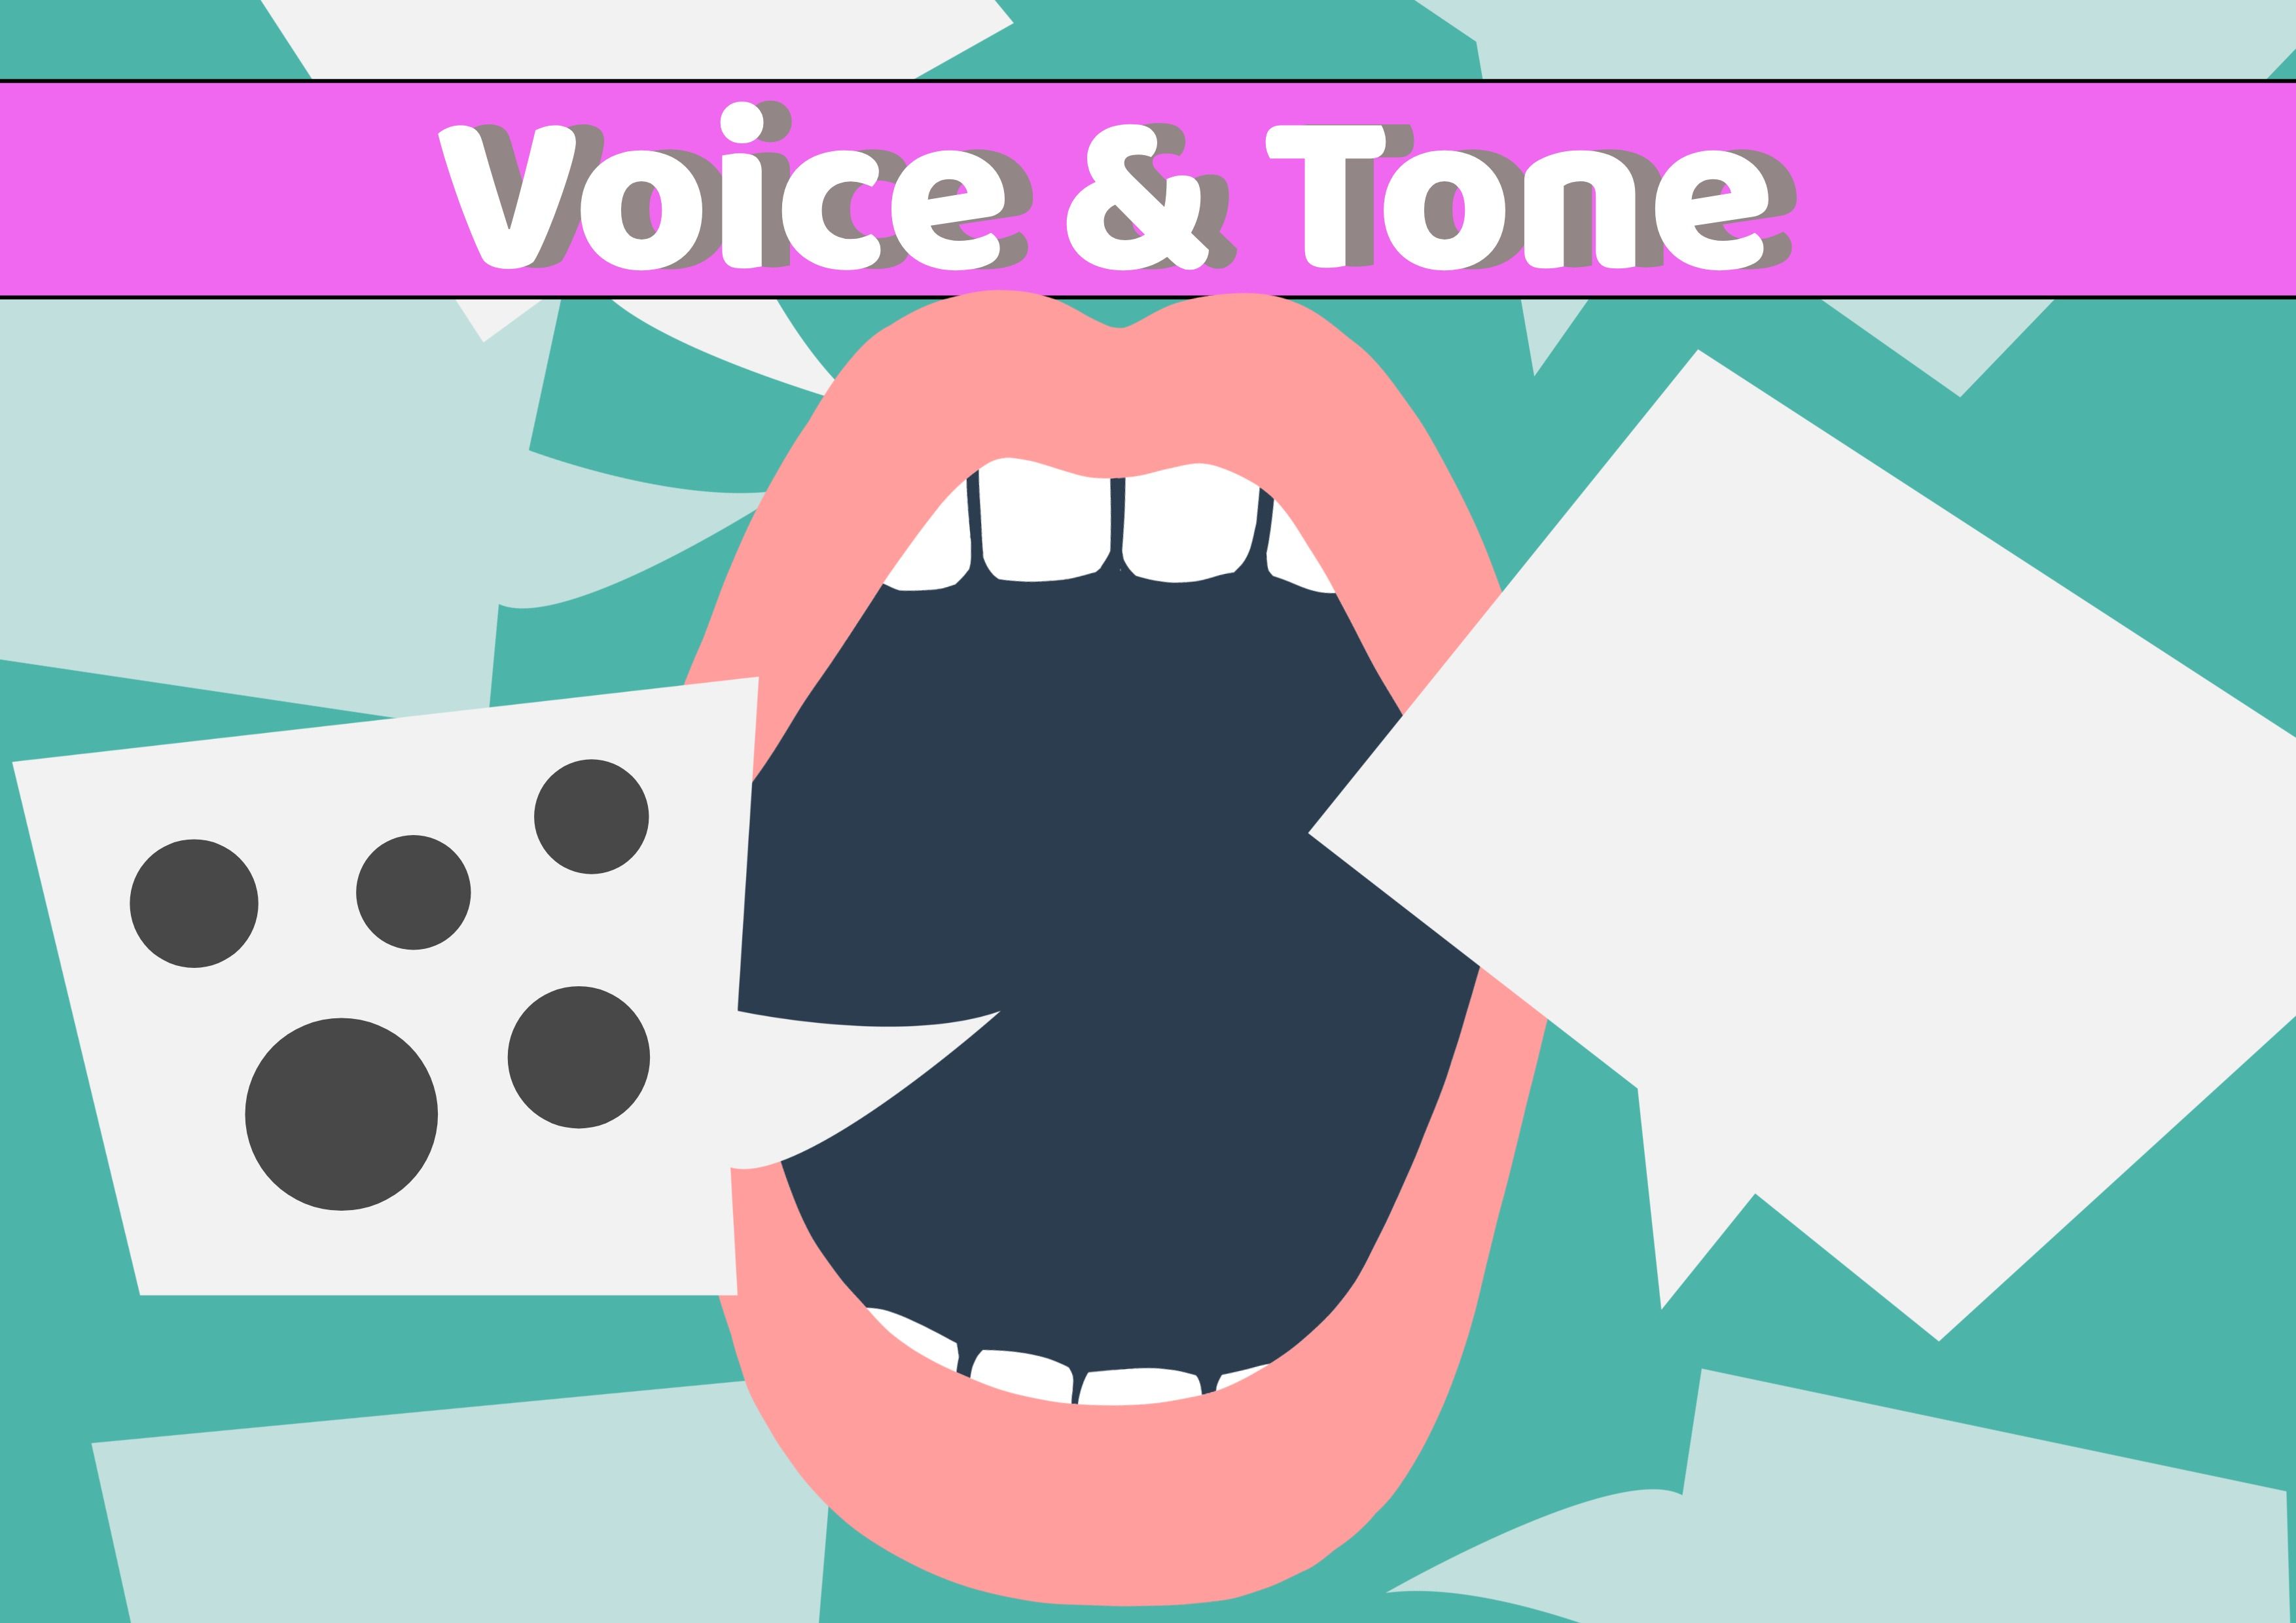 Voice & Tone image with a mouth icon and speech bubbles coming from it - Tips on how to define your brand's voice and tone - Image